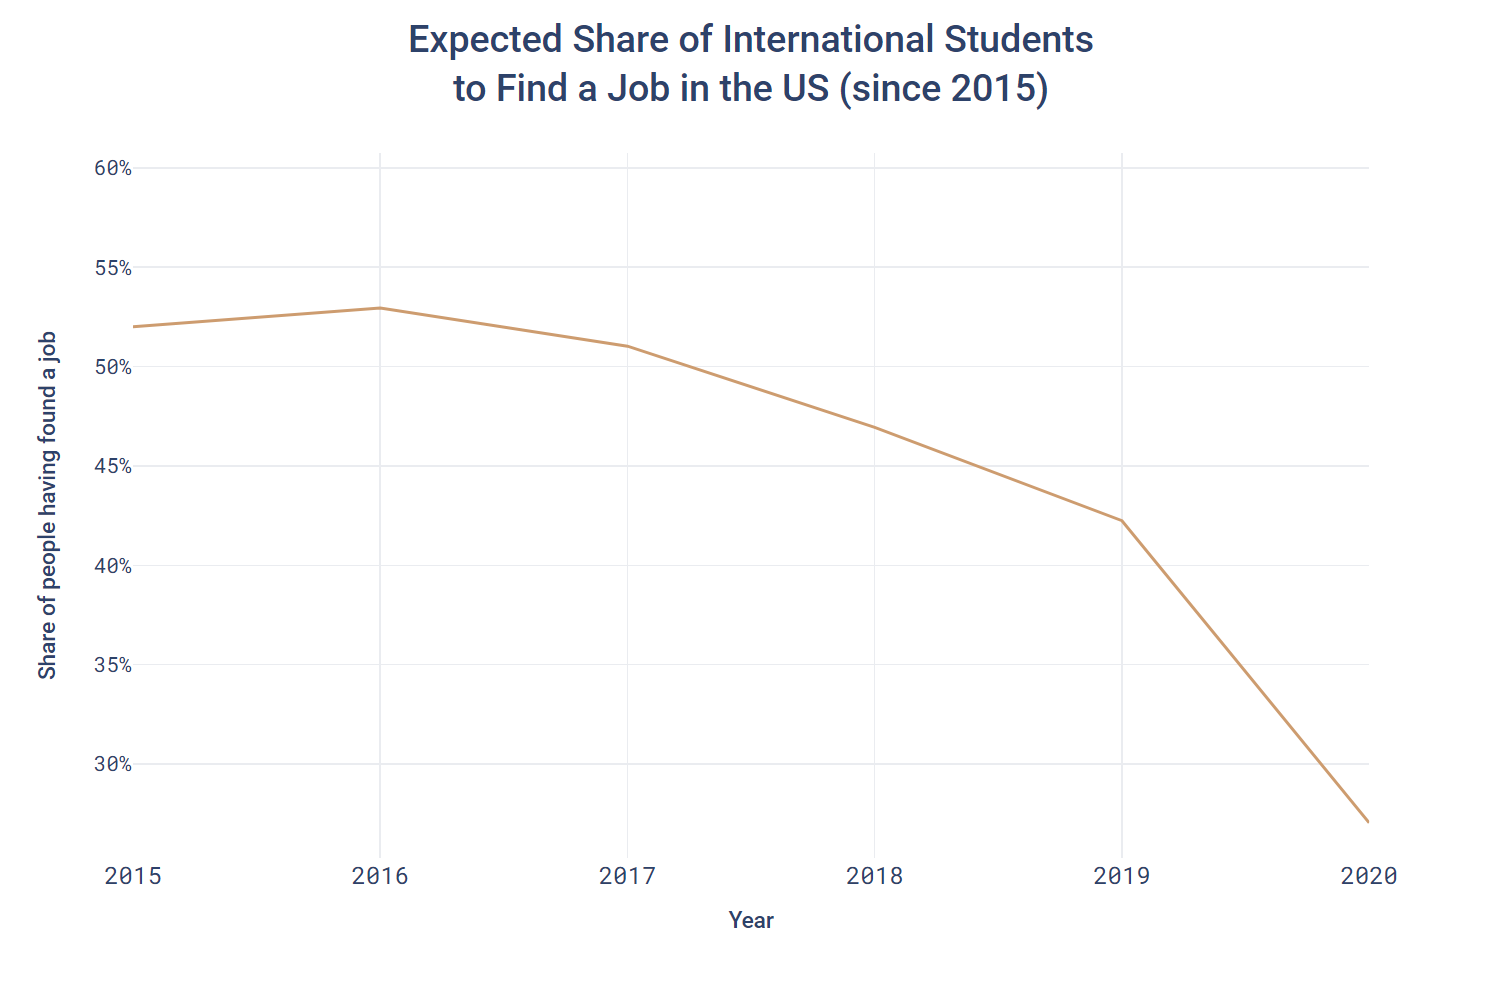 Expected Share of International Students to Find a Job in the US (since 2015